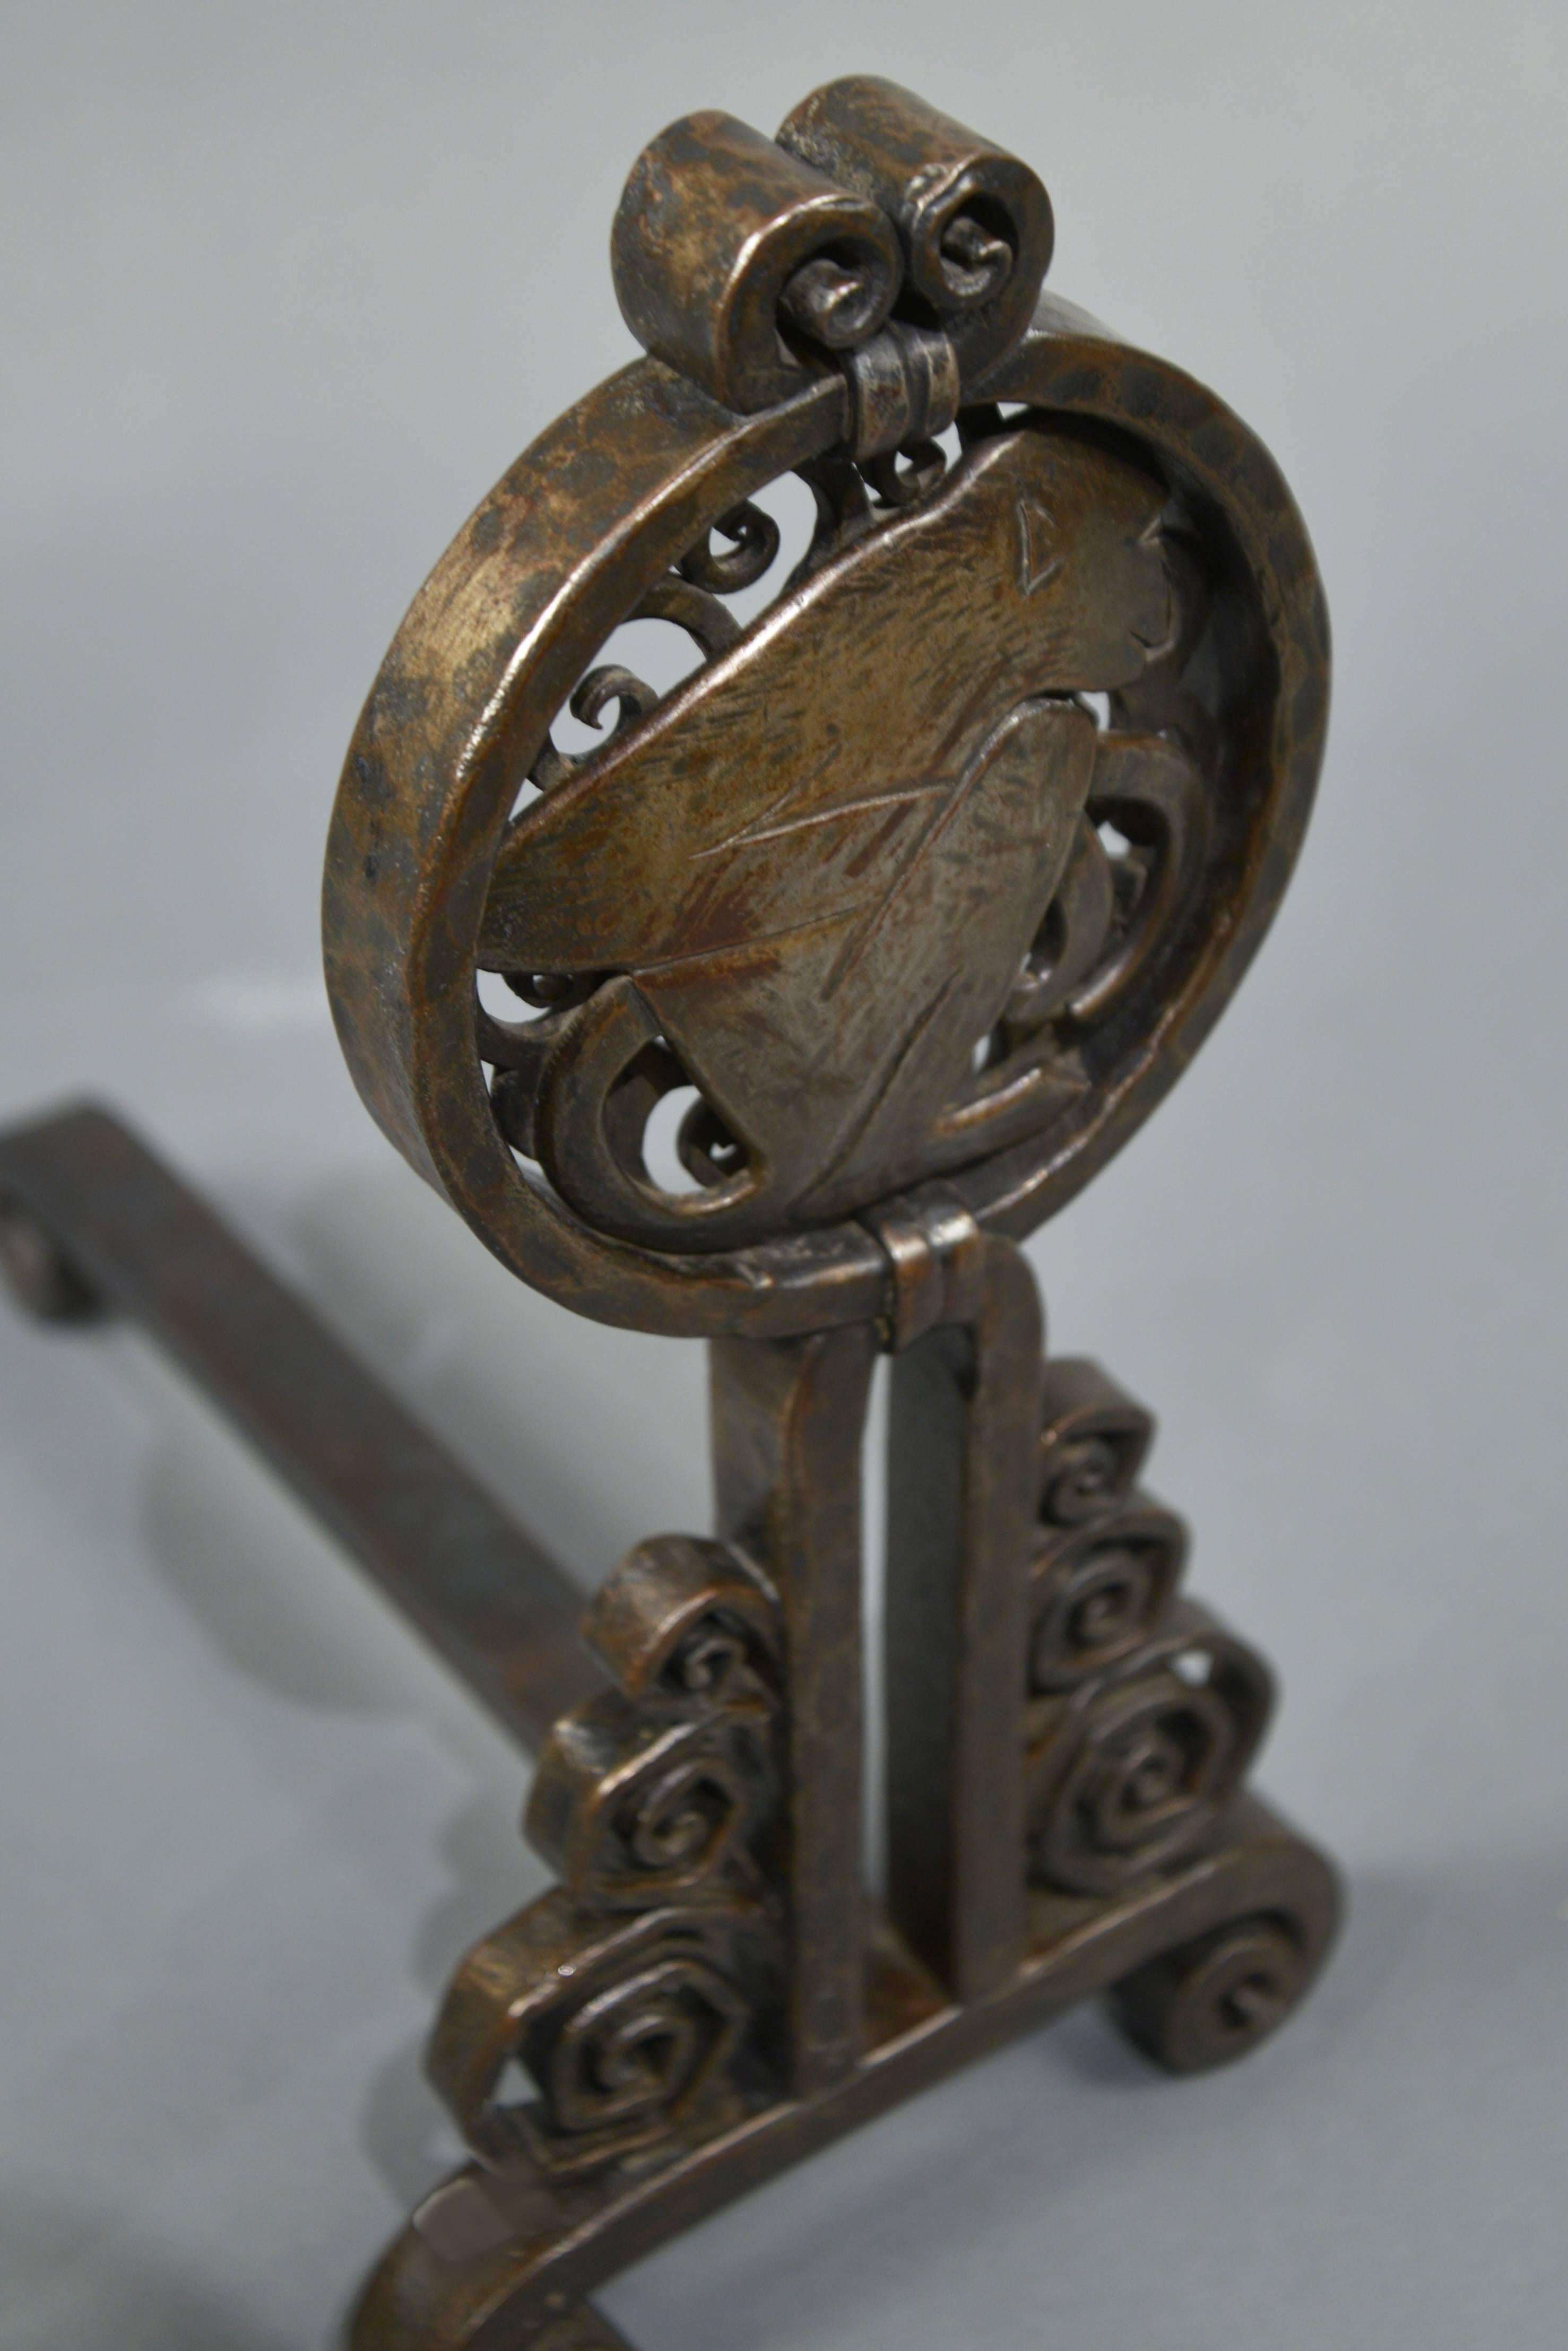 Pair of wrought iron andirons, each featuring a round medallion depicting a crouching monkey, raised on a base with scrolls in varying sizes. One andiron marked “E Brandt”.

  

